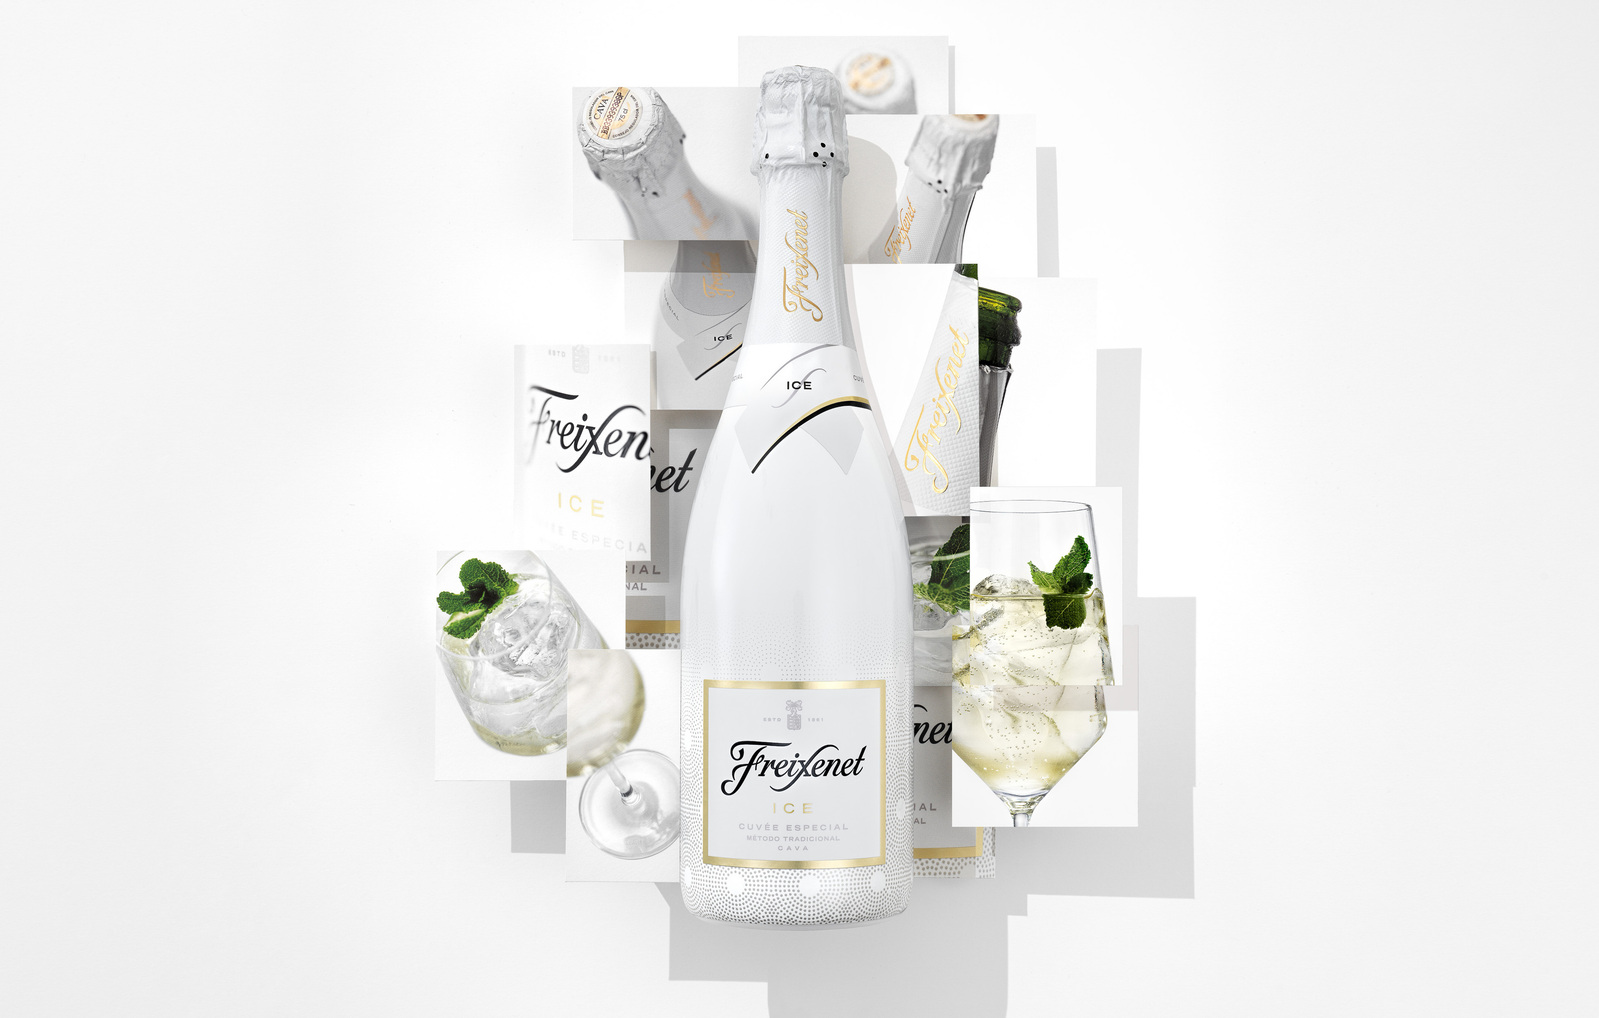 Wine, liquor and beverage product photography by commercial and advertising photographer Timothy Hogan in Los Angeles